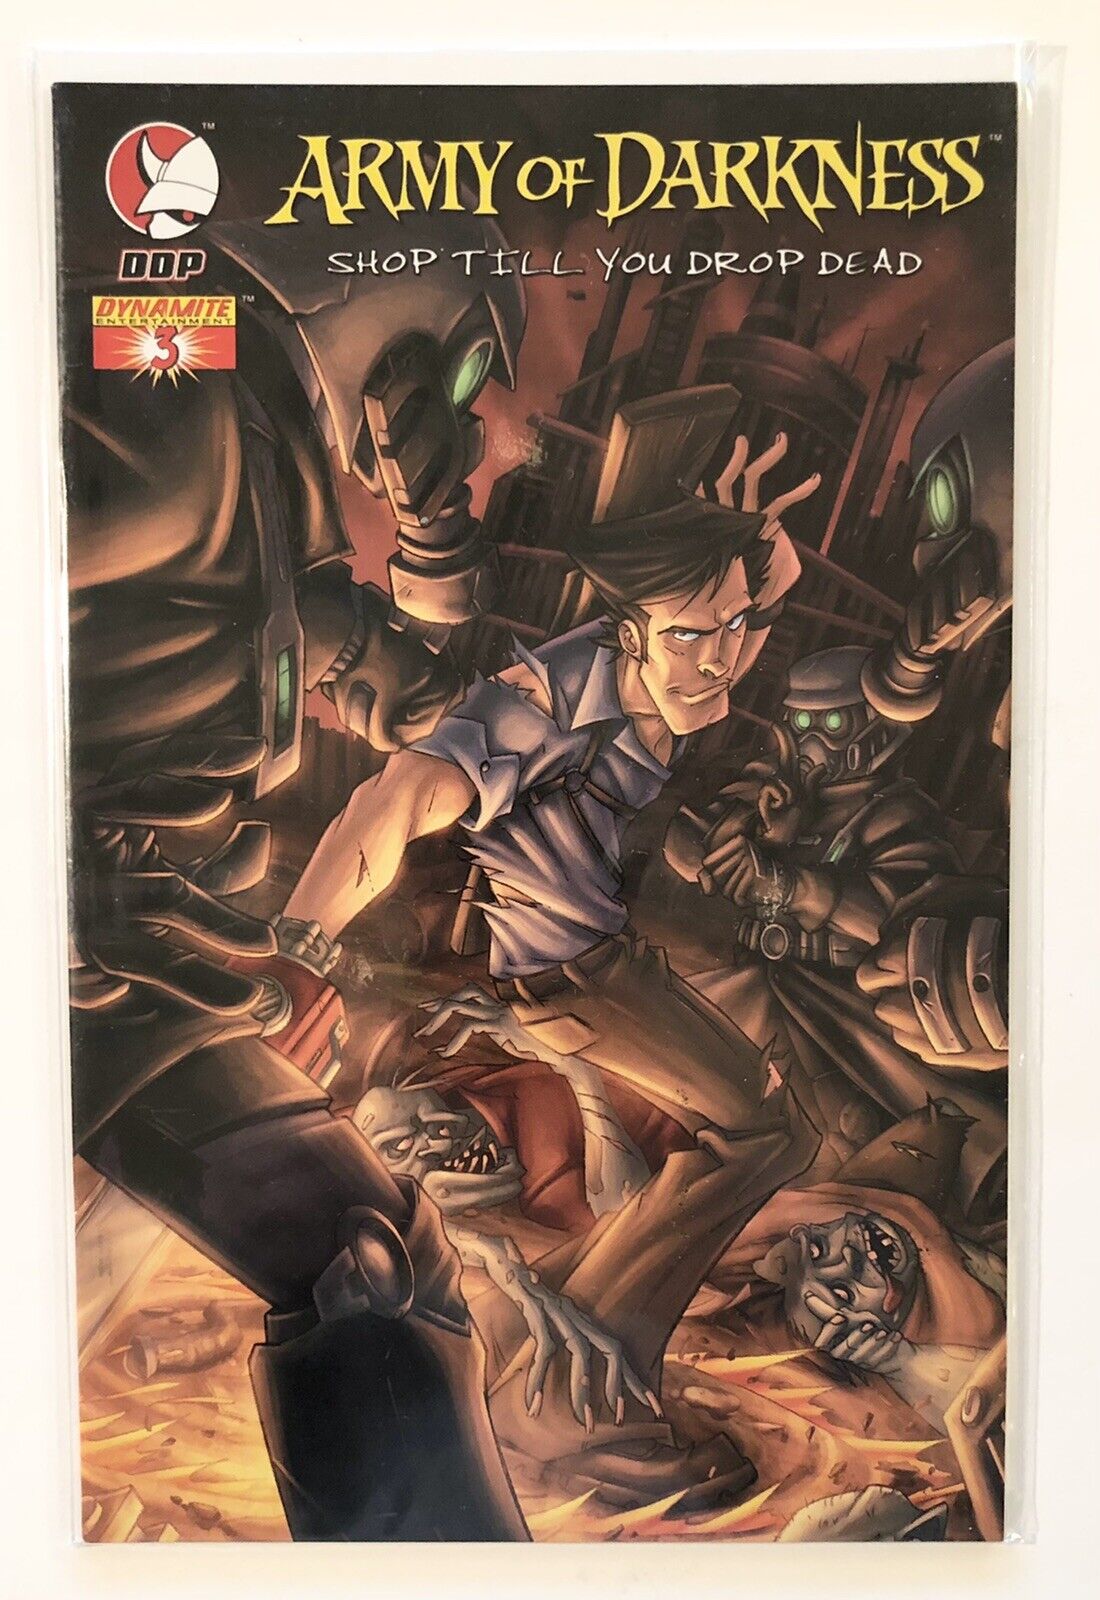 2006 DDP Army of Darkness Shop Till You Drop Dead #3 Glow In The Dark Cover NM